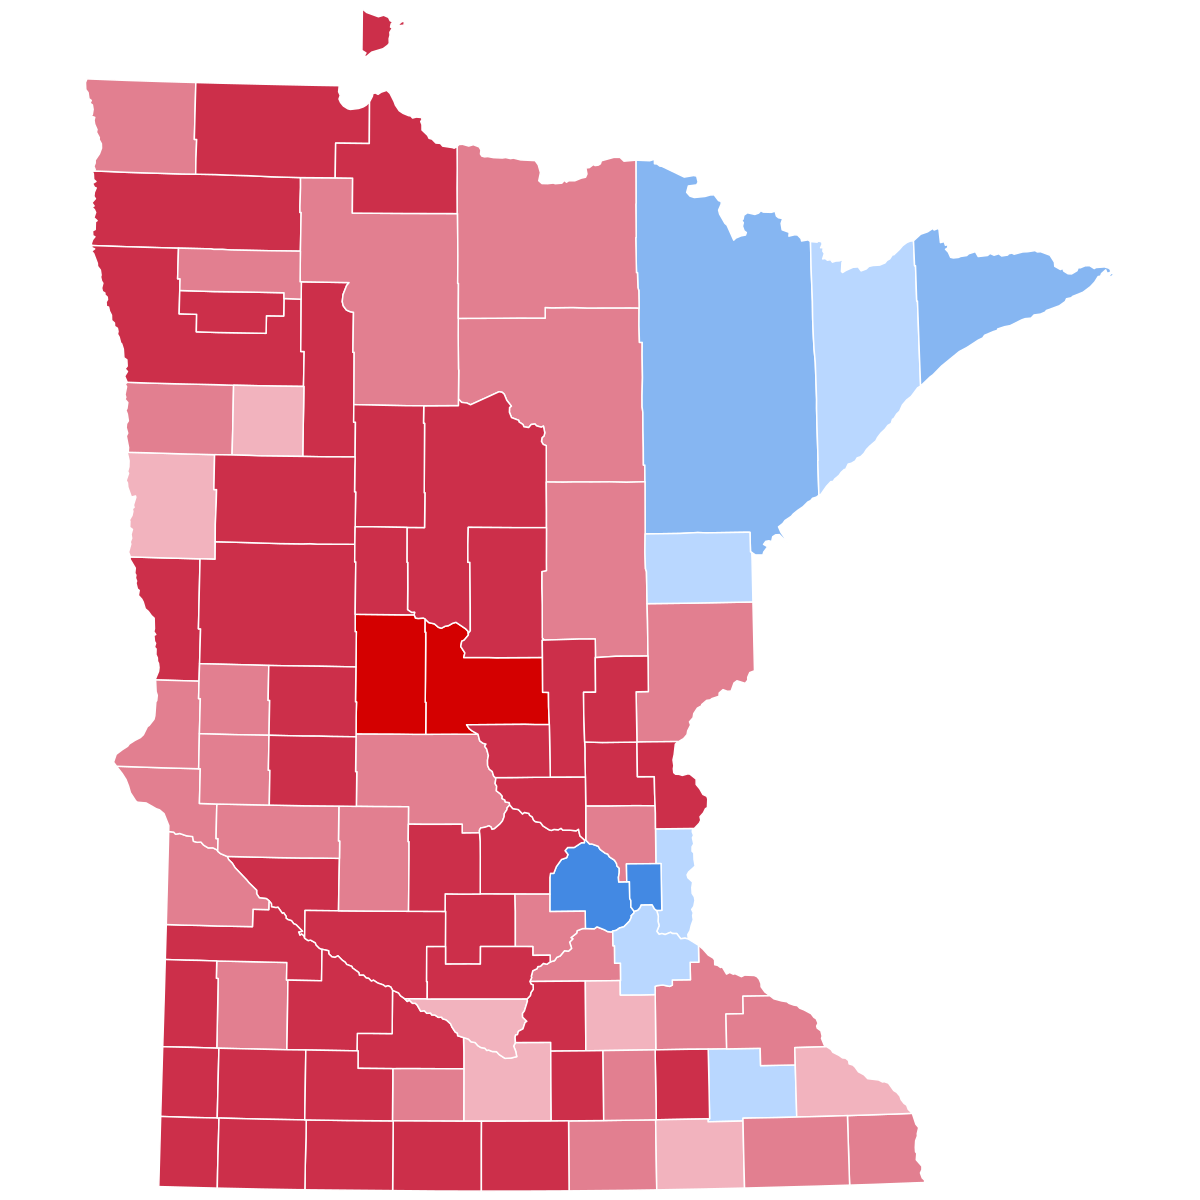 2016 united states presidential election in minnesota